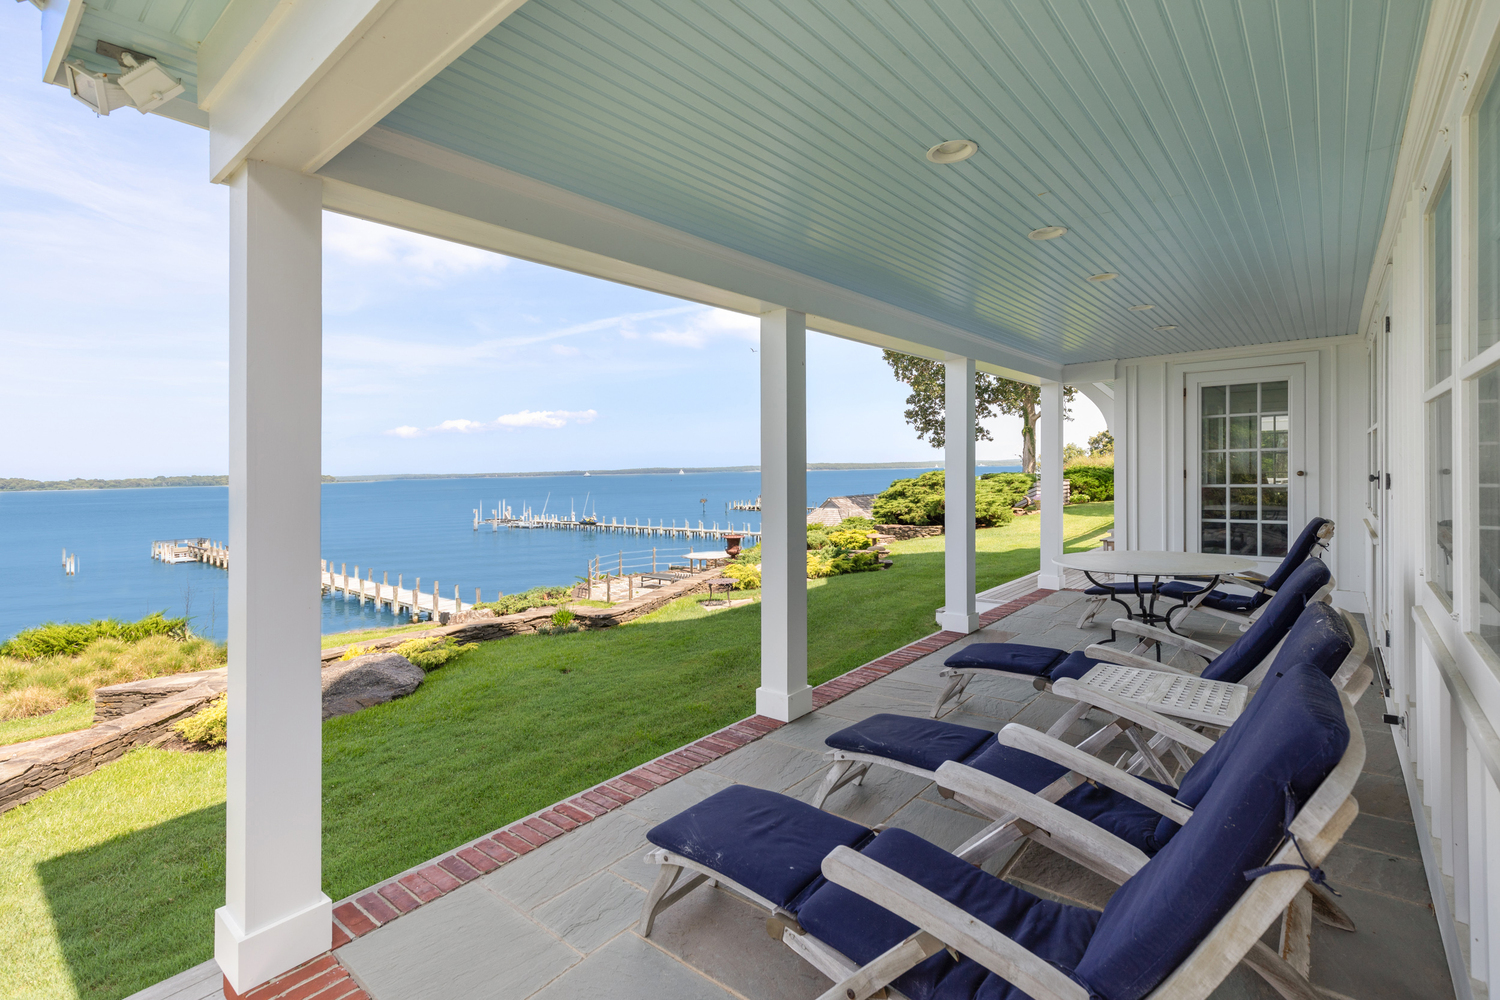 48 Forest Road, North Haven. COURTESY MODLIN GROUP HAMPTONS